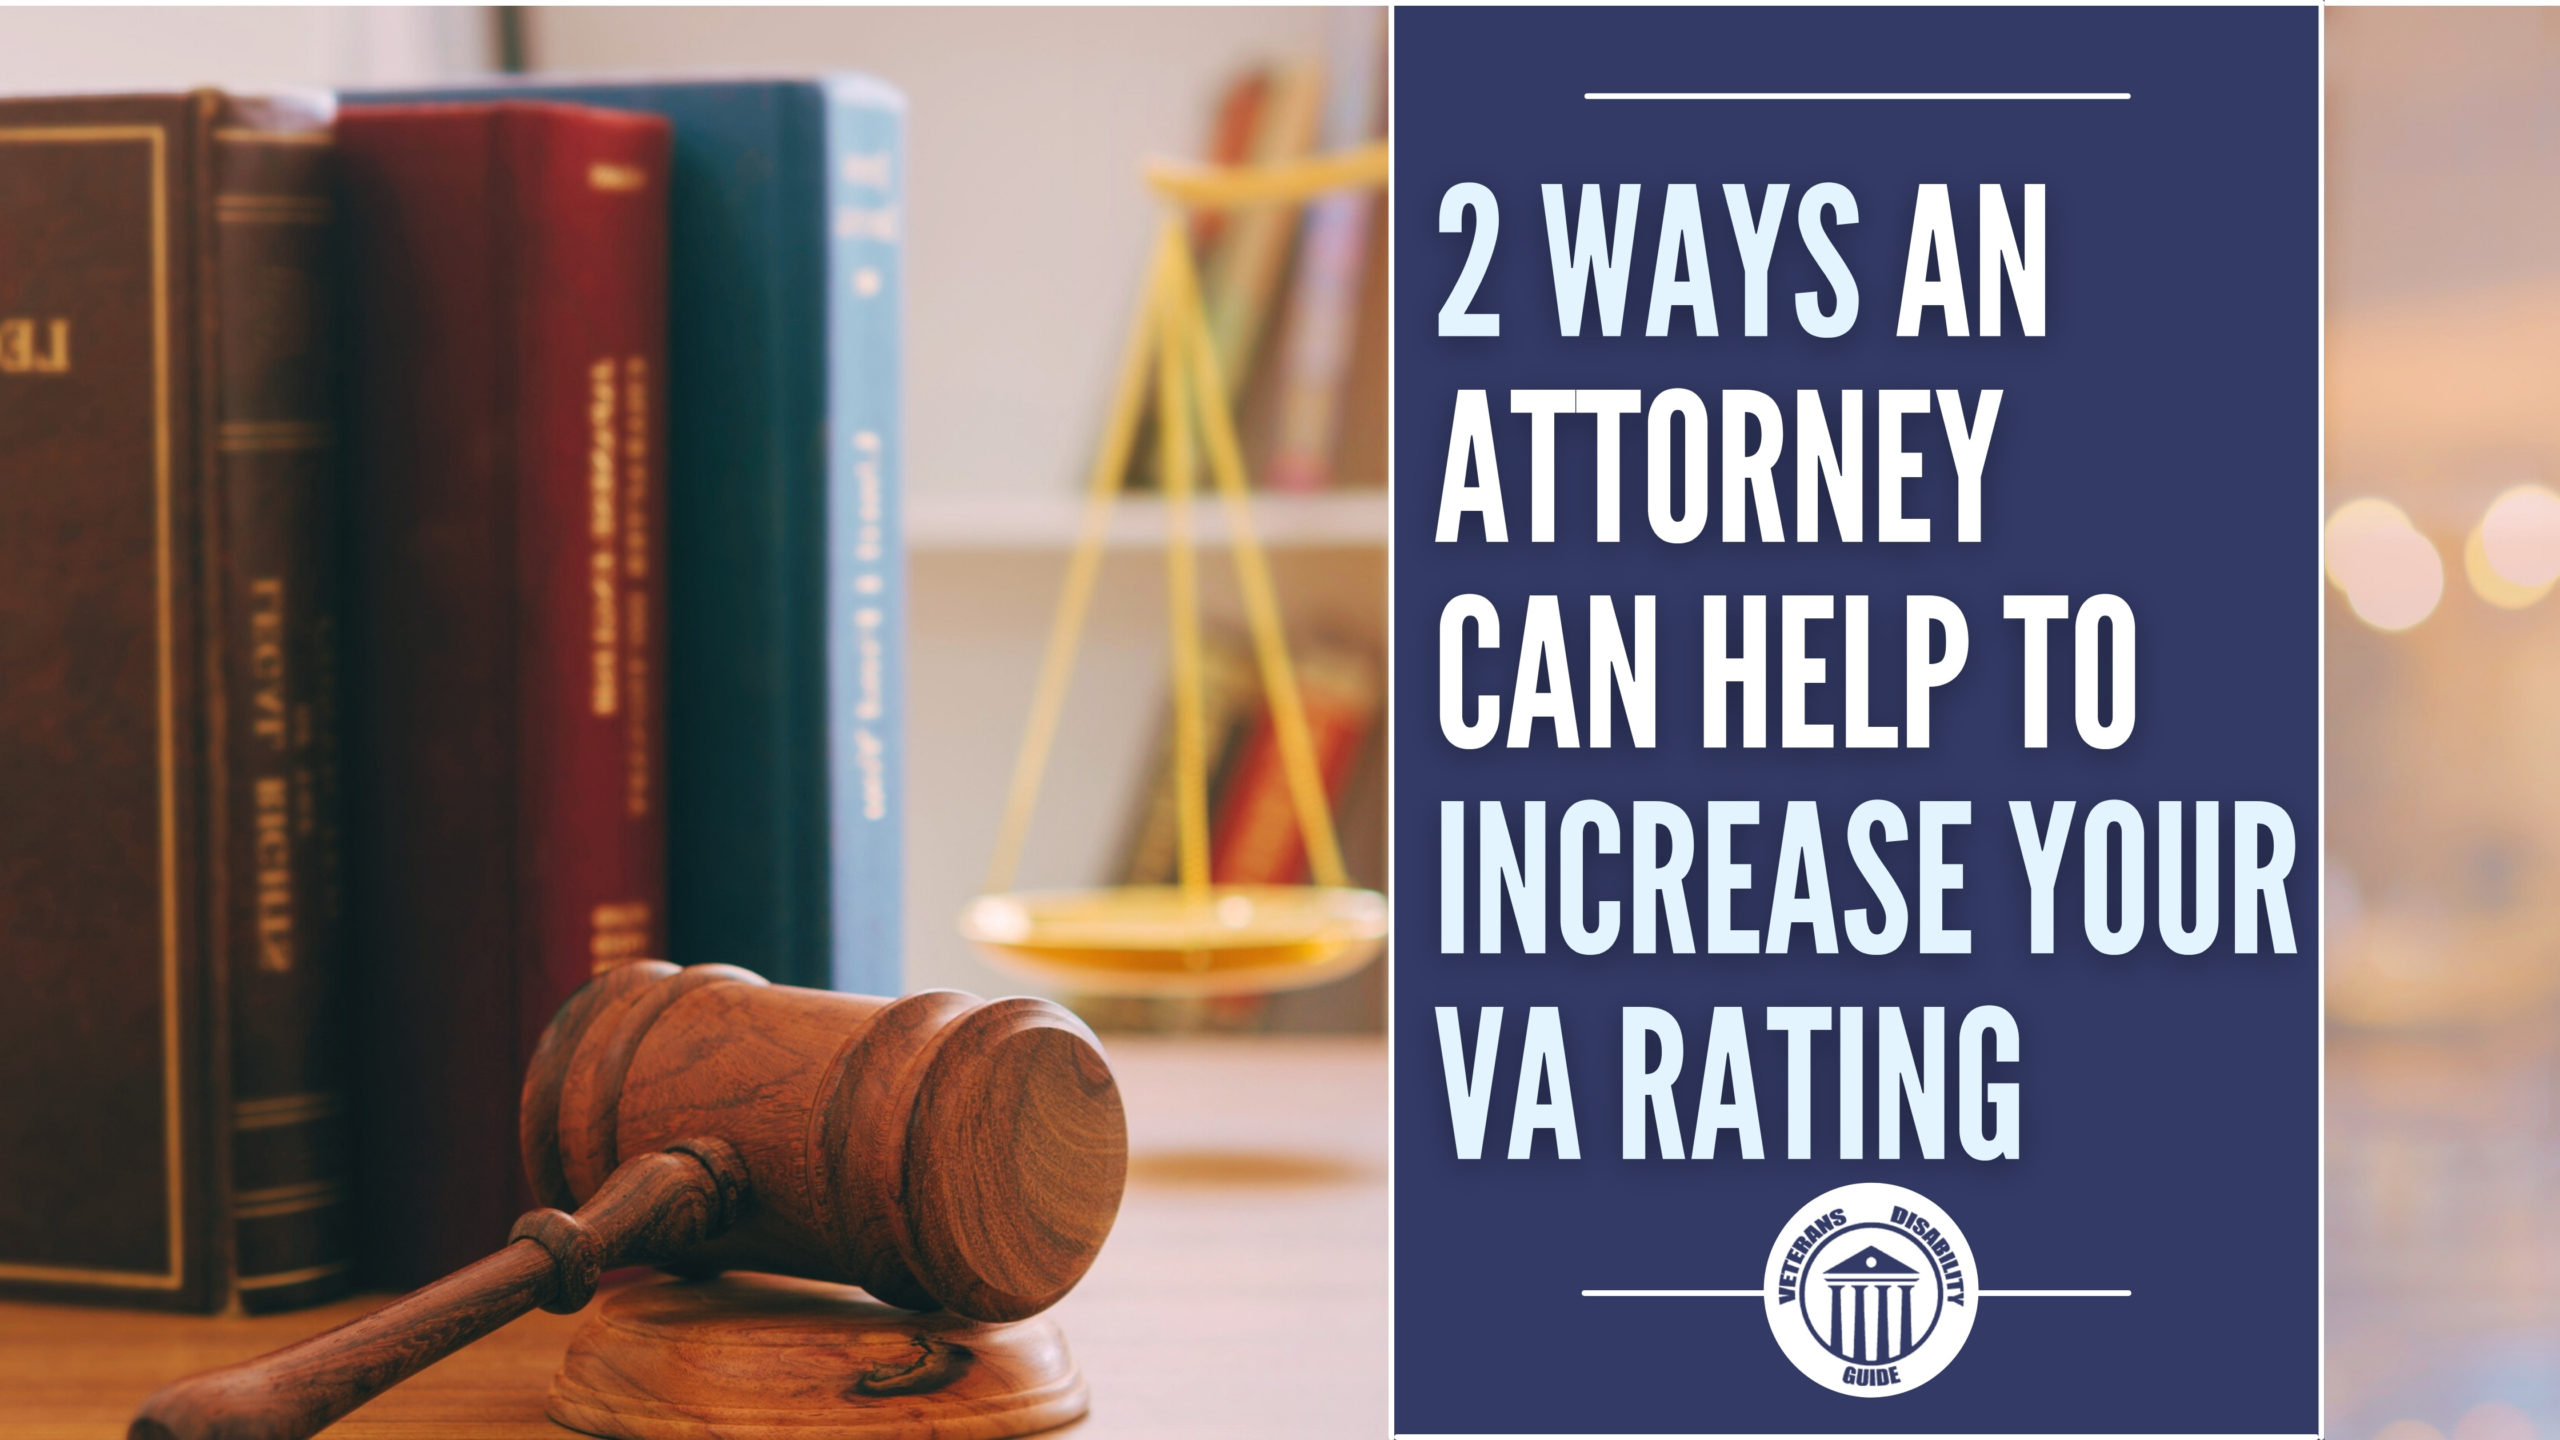 2 Ways An Attorney Can Help To Increase Your VA Rating blog post header